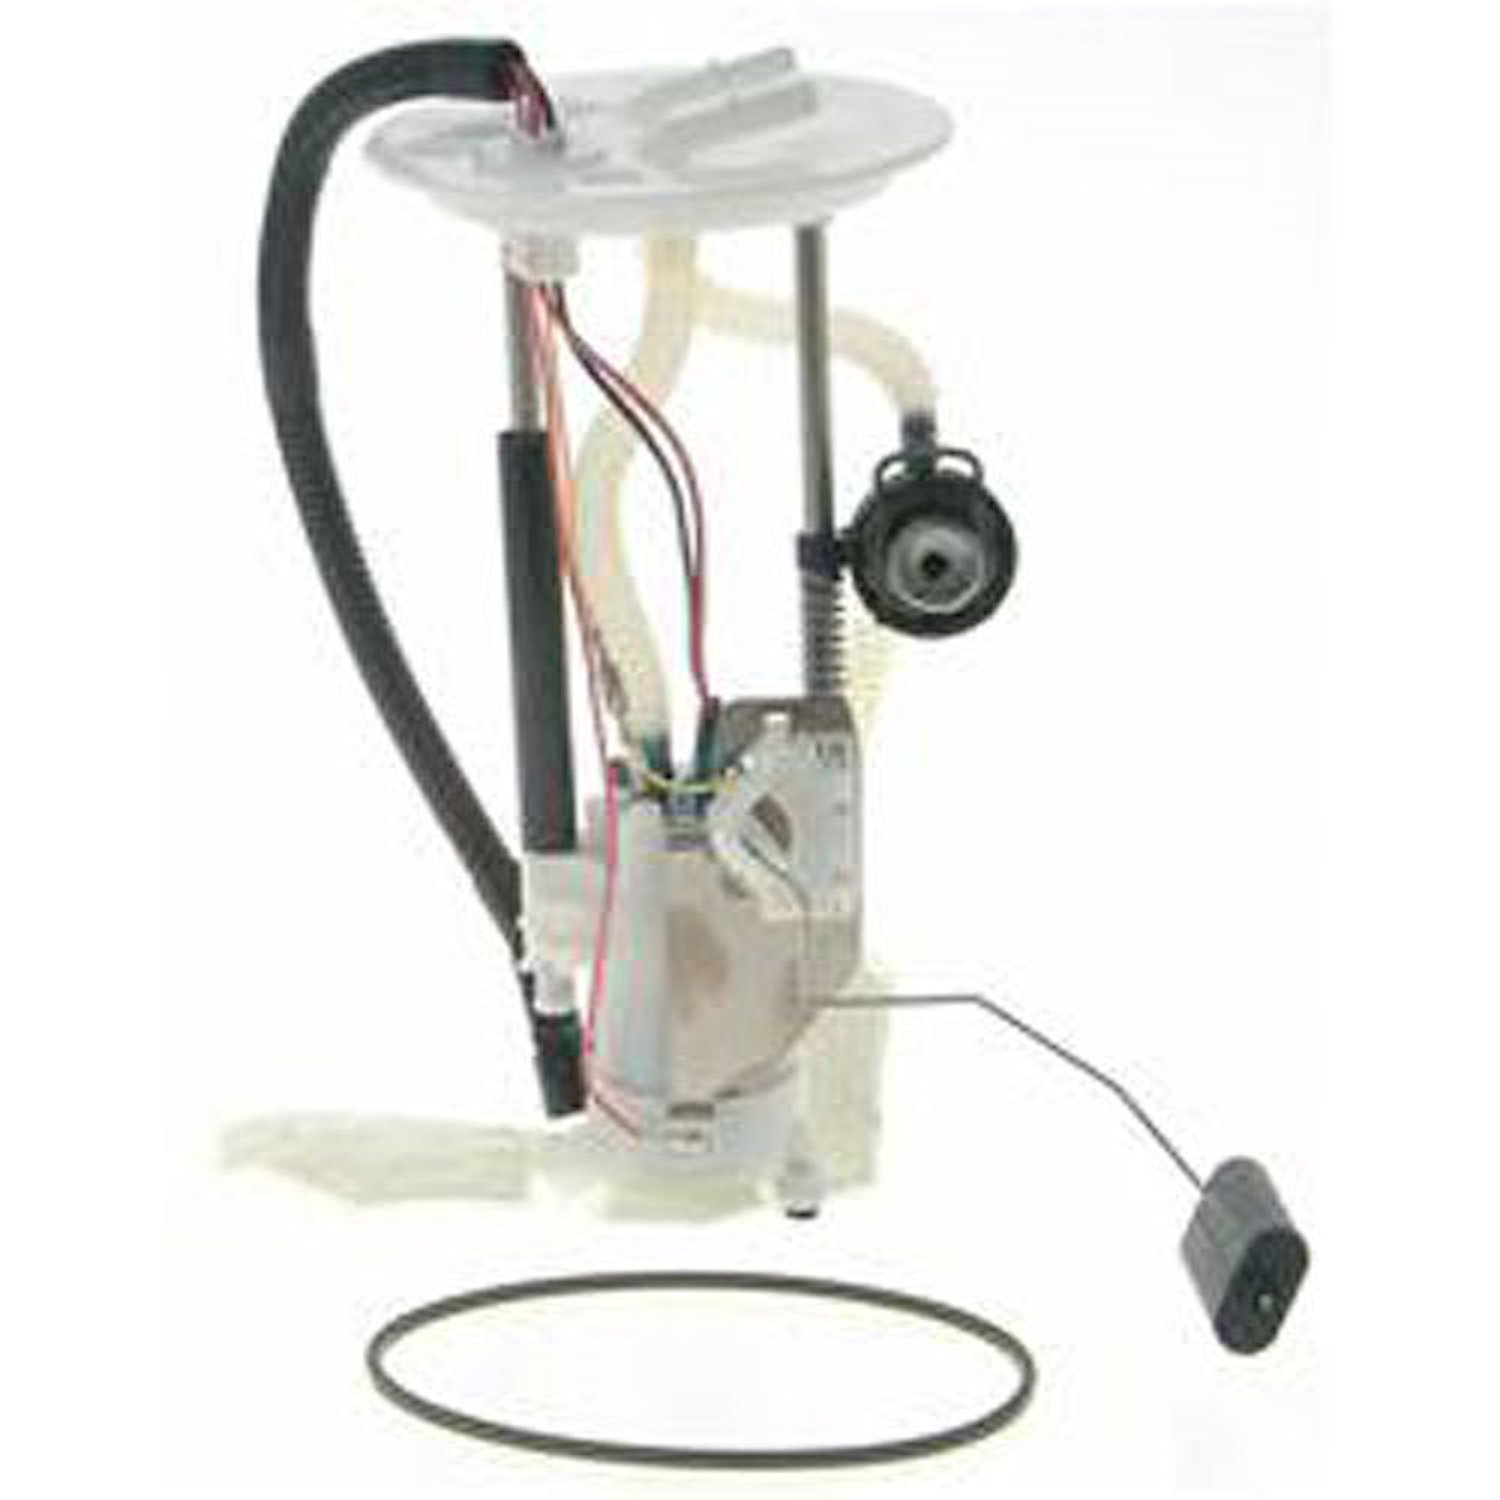 OE Ford Replacement Electric Fuel Pump Module Assembly 2005-06 Ford Expedition 5.4L V8